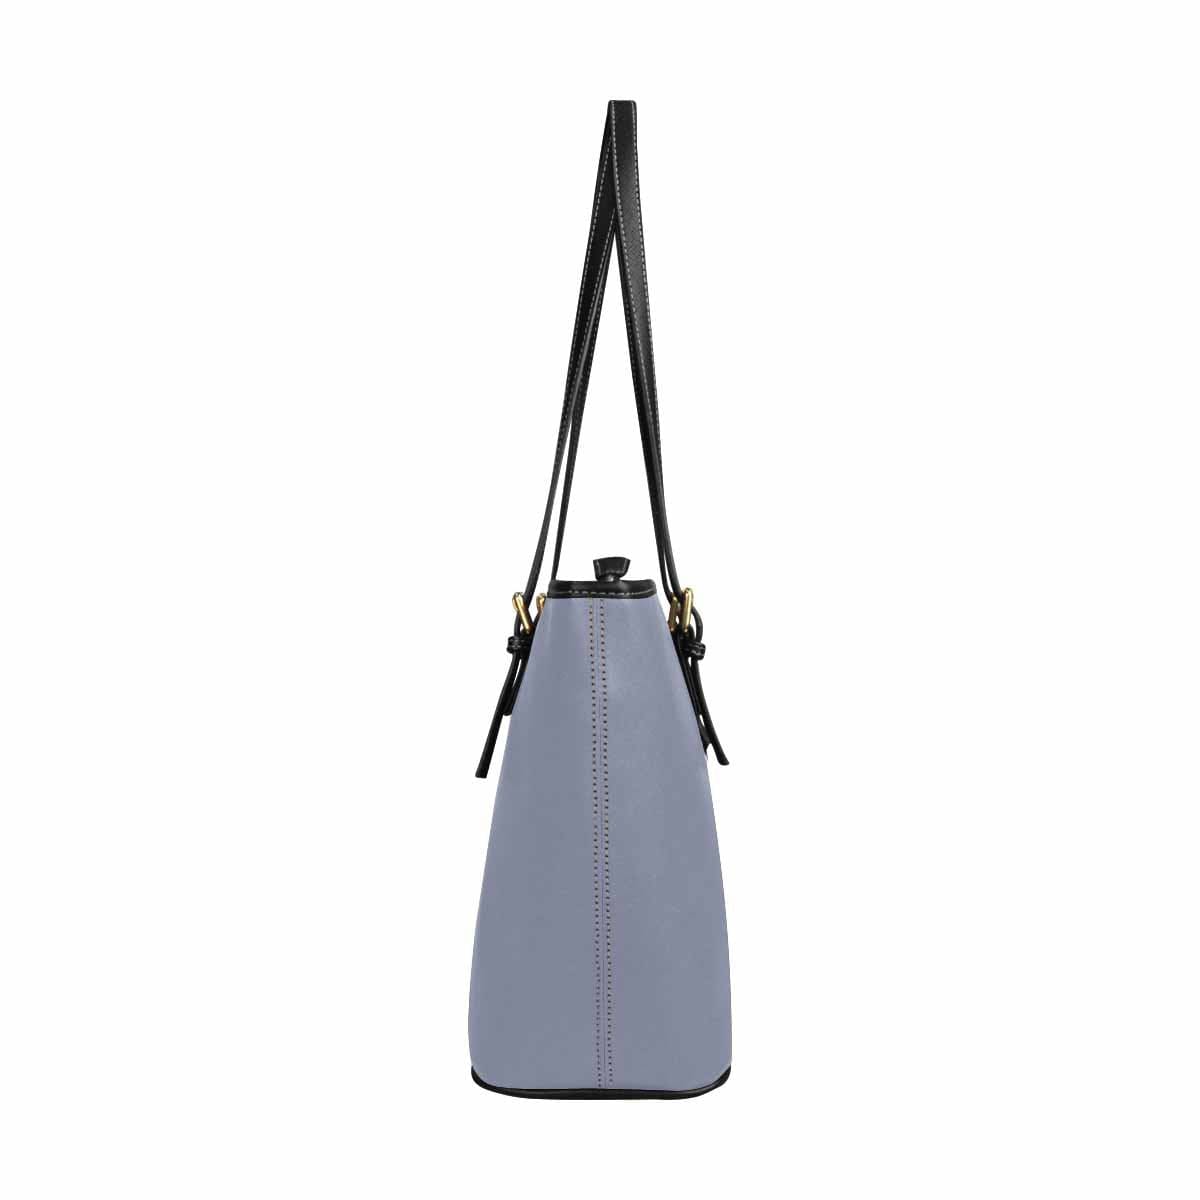 Large Leather Tote Shoulder Bag - Cool Gray - Bags | Leather Tote Bags